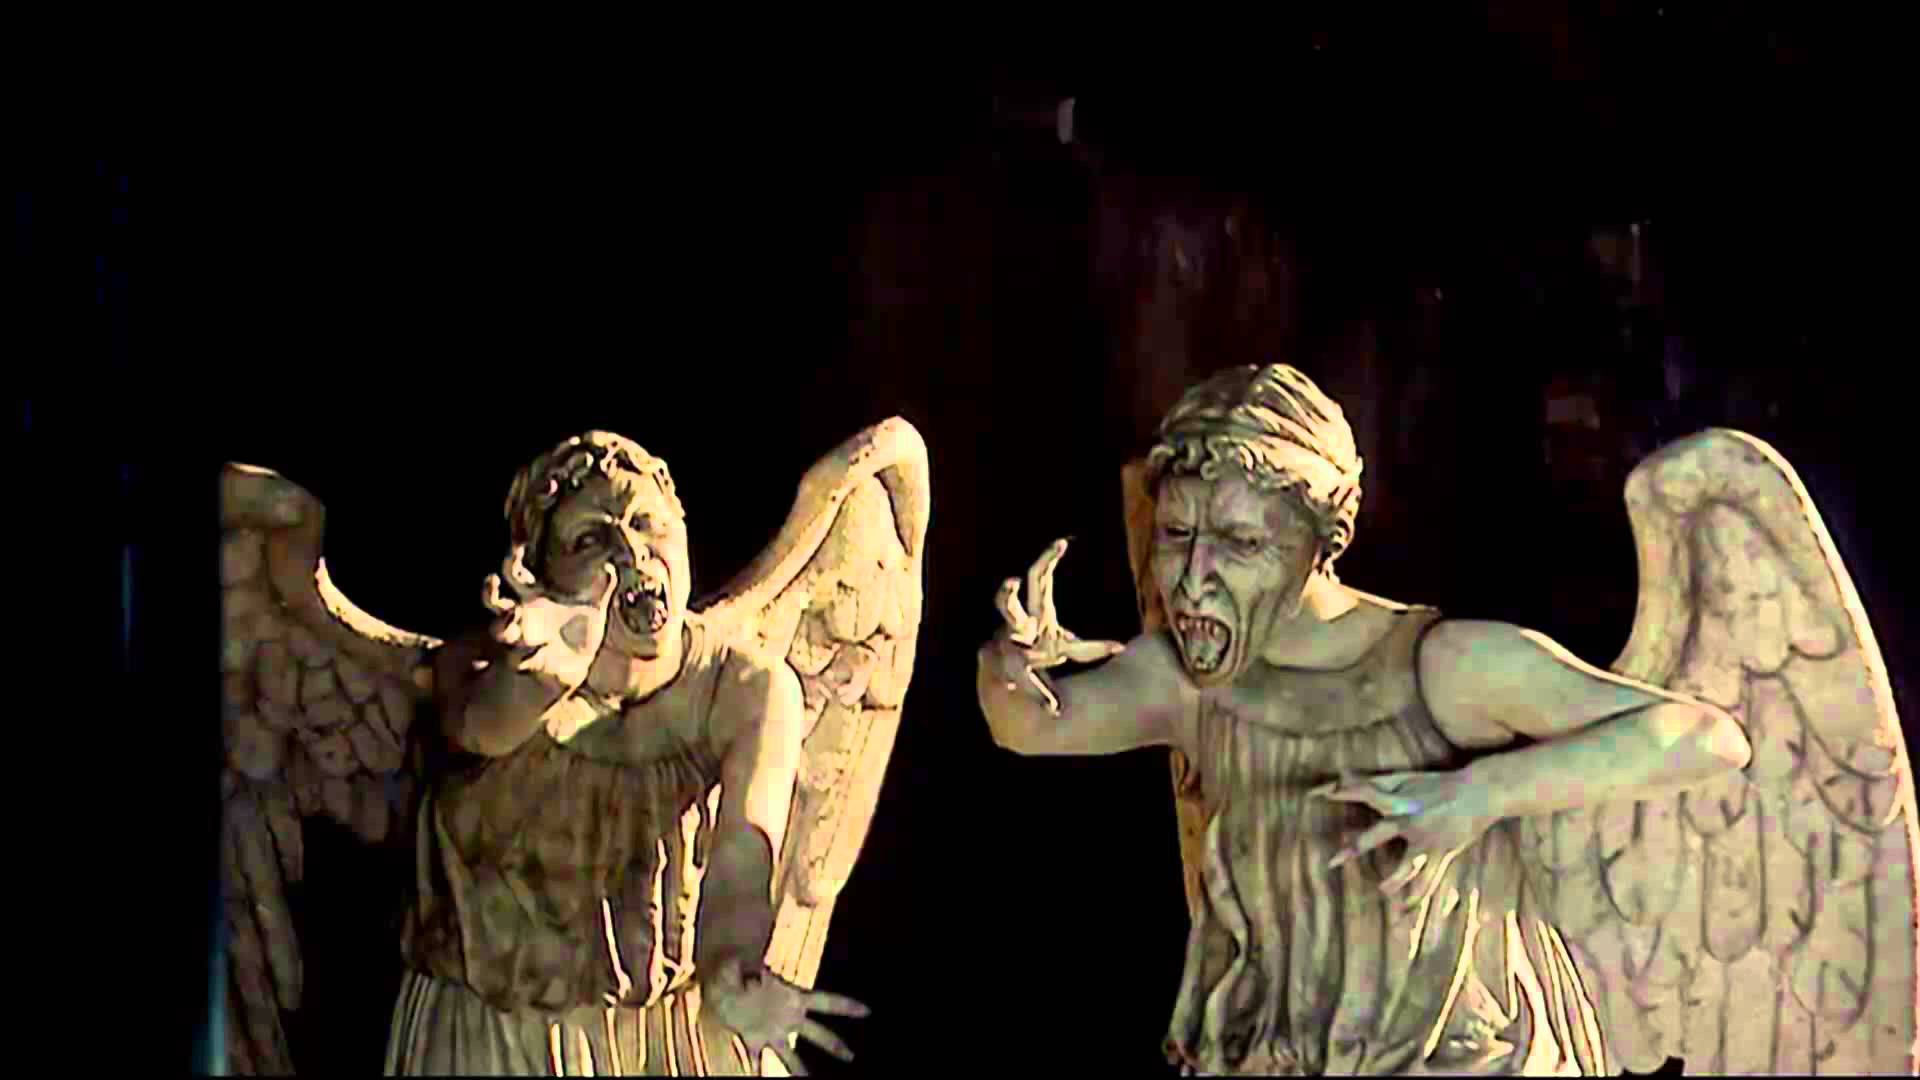 Doctor Who Weeping Angels Screensaver